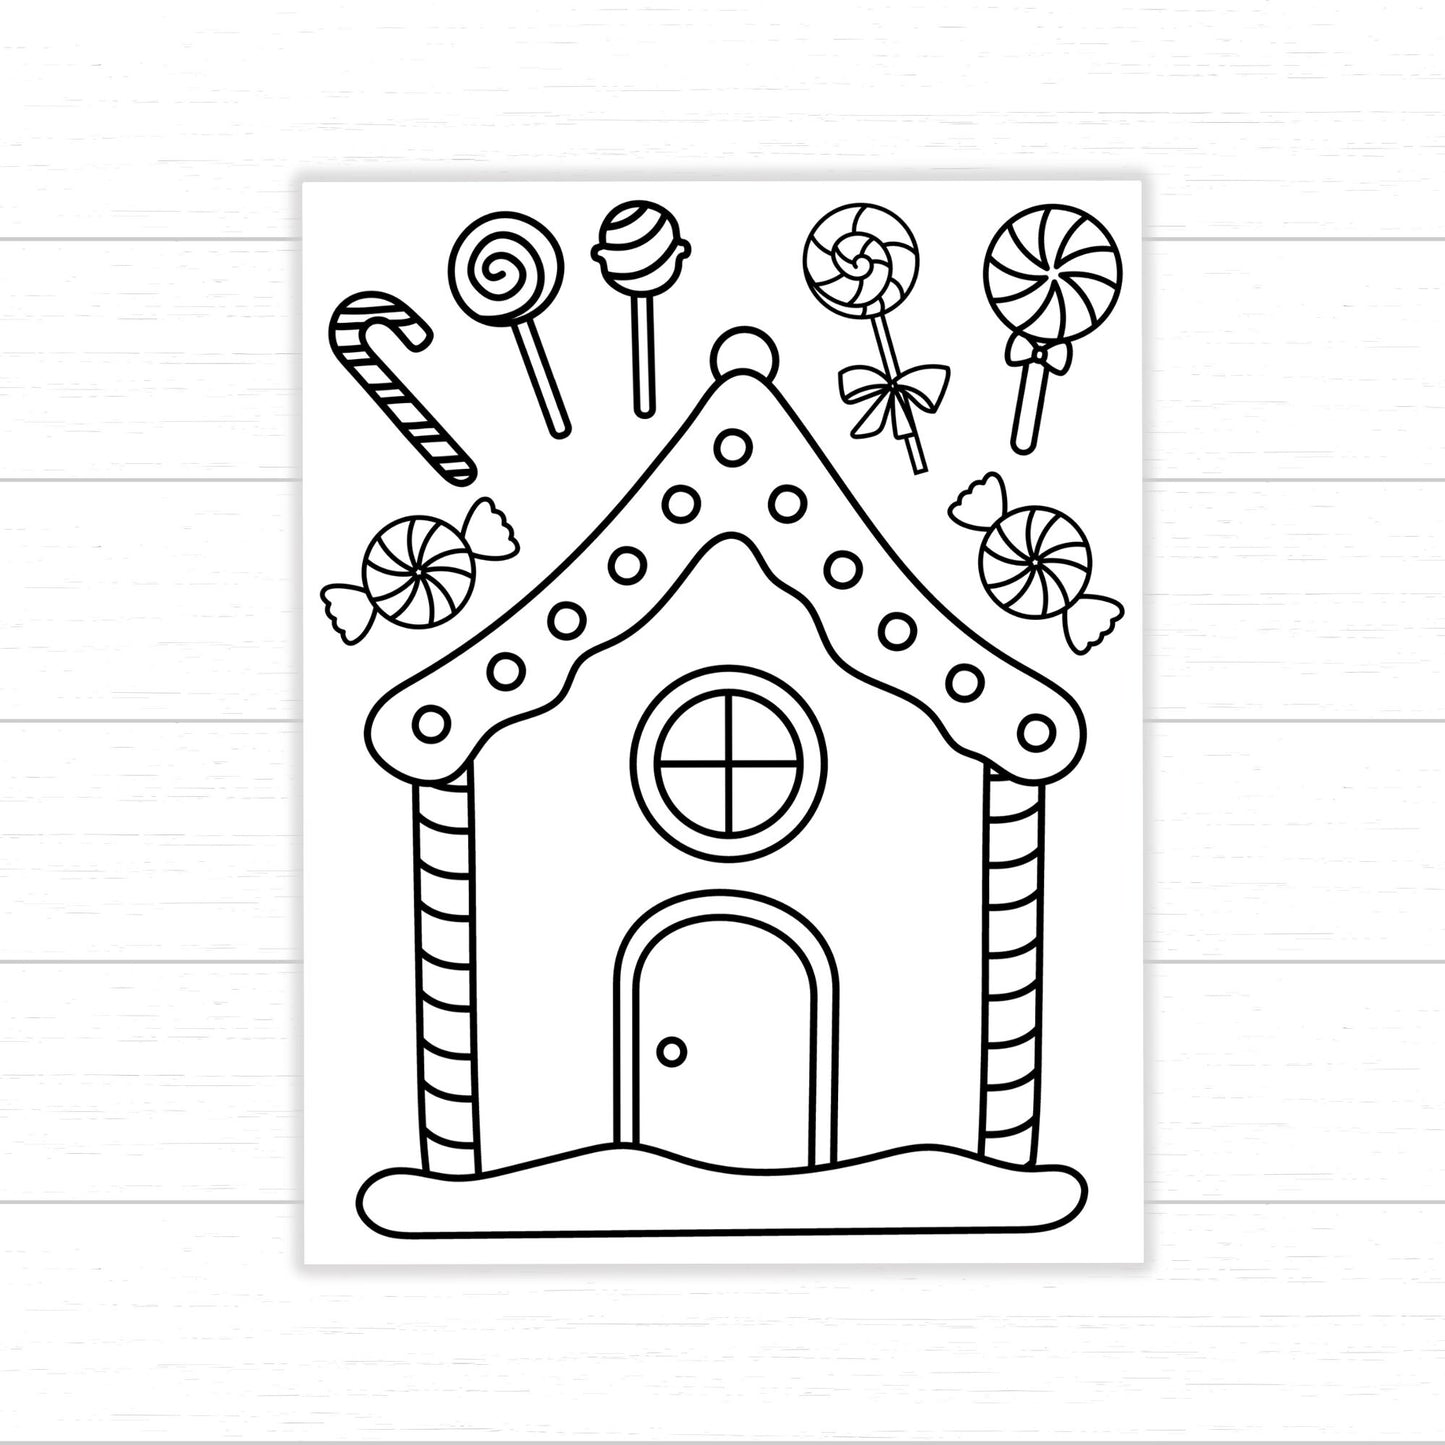 Gingerbread House Coloring Pages, Christmas Coloring Pages for Kids, Printable Christmas Coloring Pages, Christmas Activities for Kids